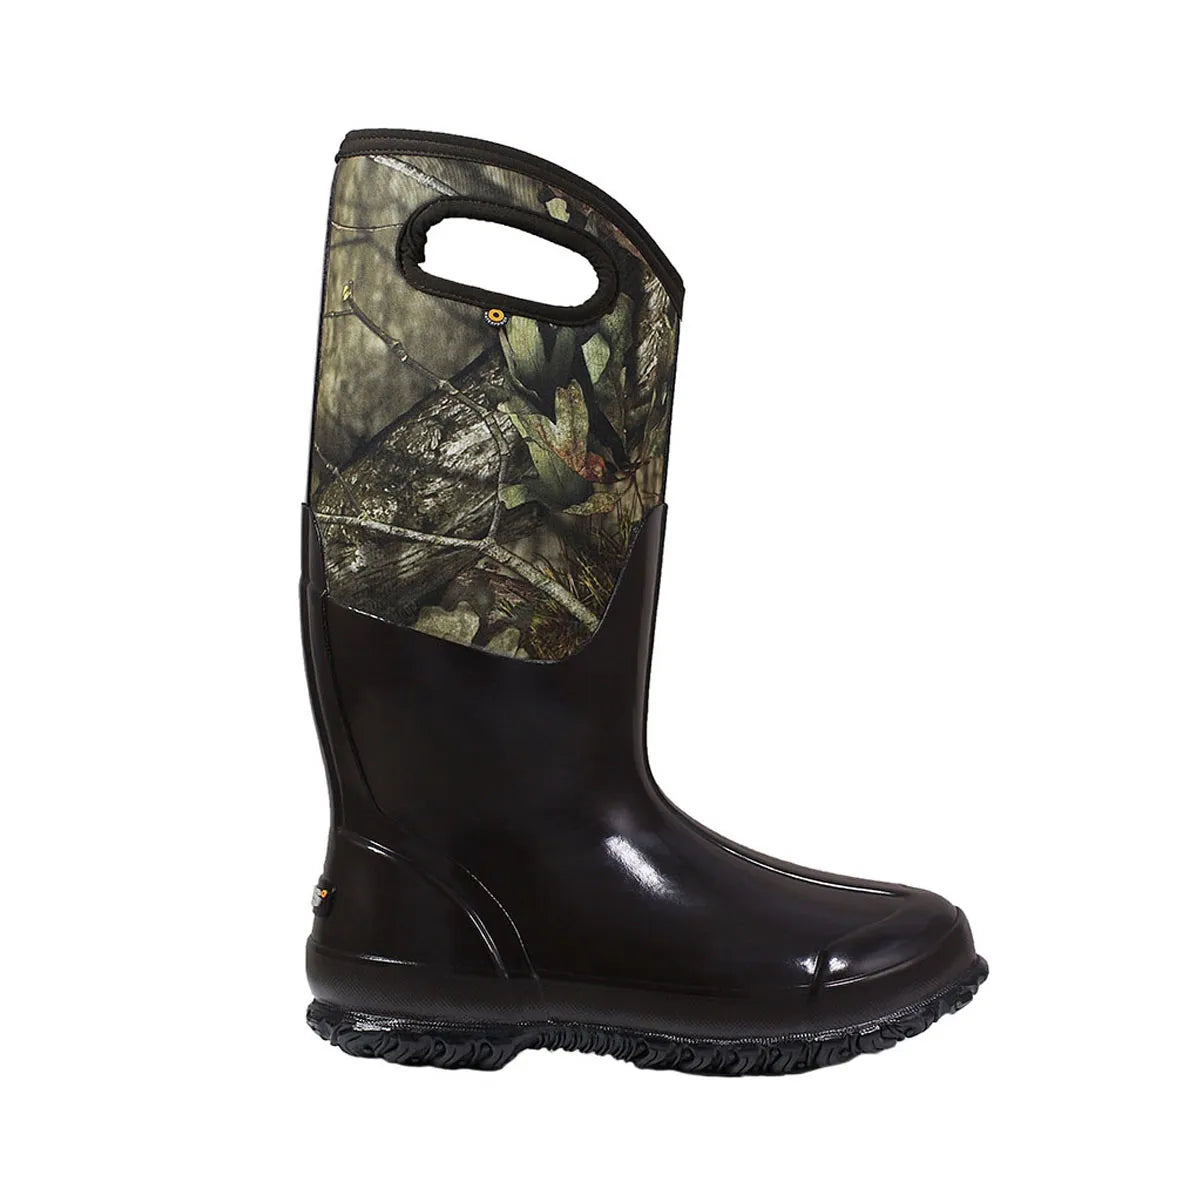 Classic Camo Women’s Rubber Hunting Boots